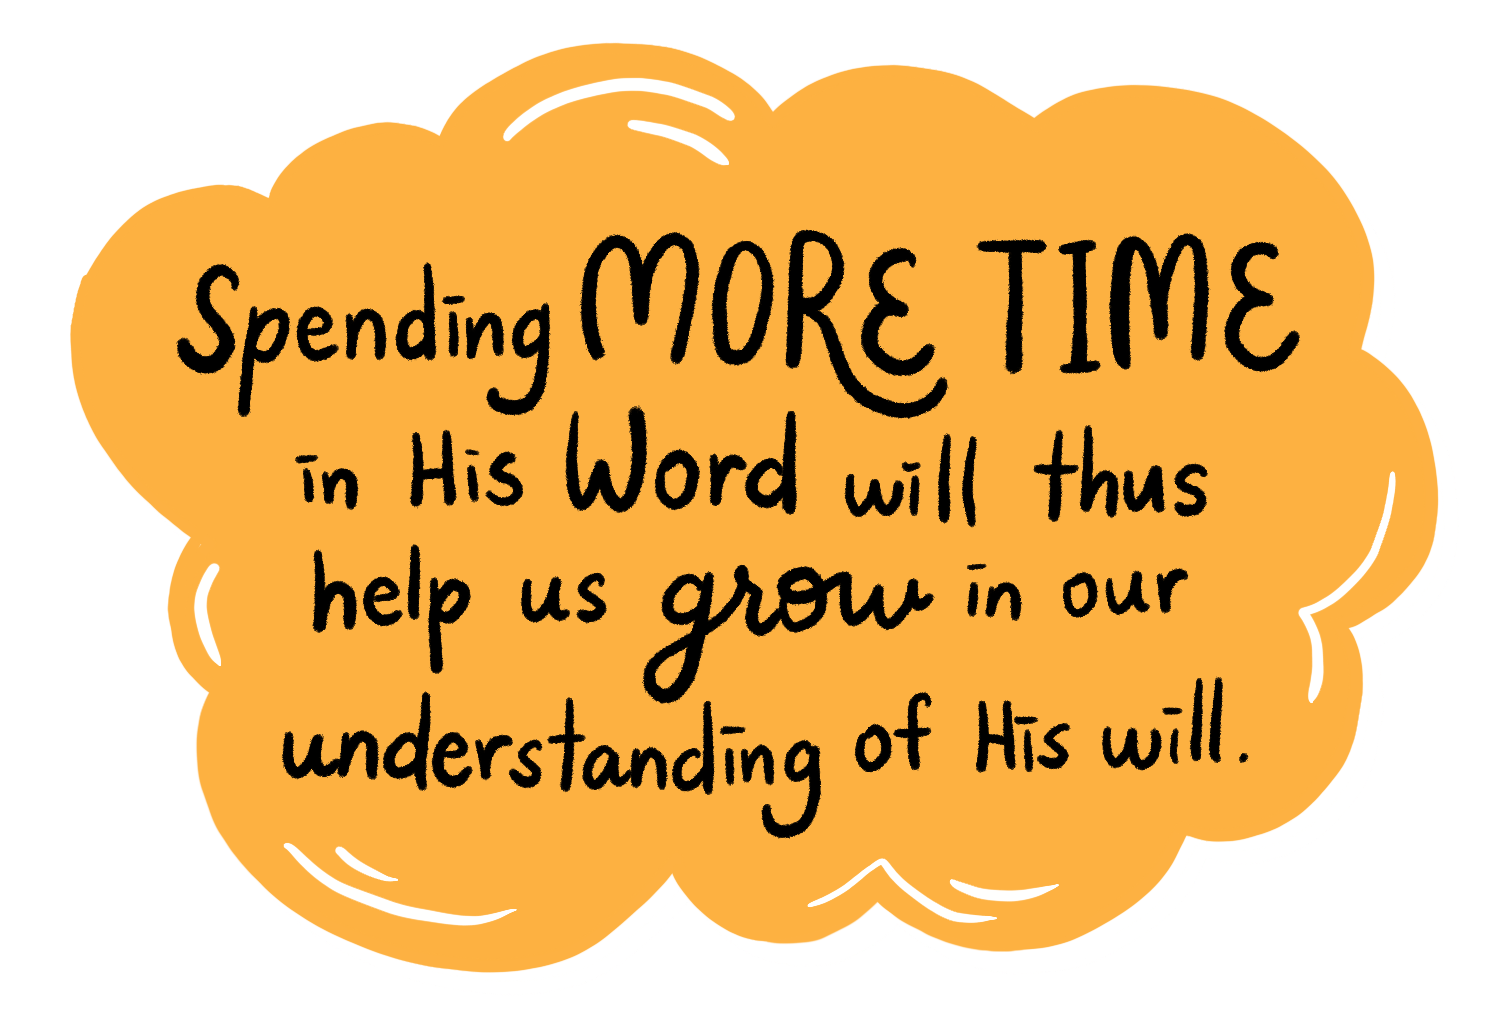 Spending more time in His Word will thus help us grow in our understanding of His will.